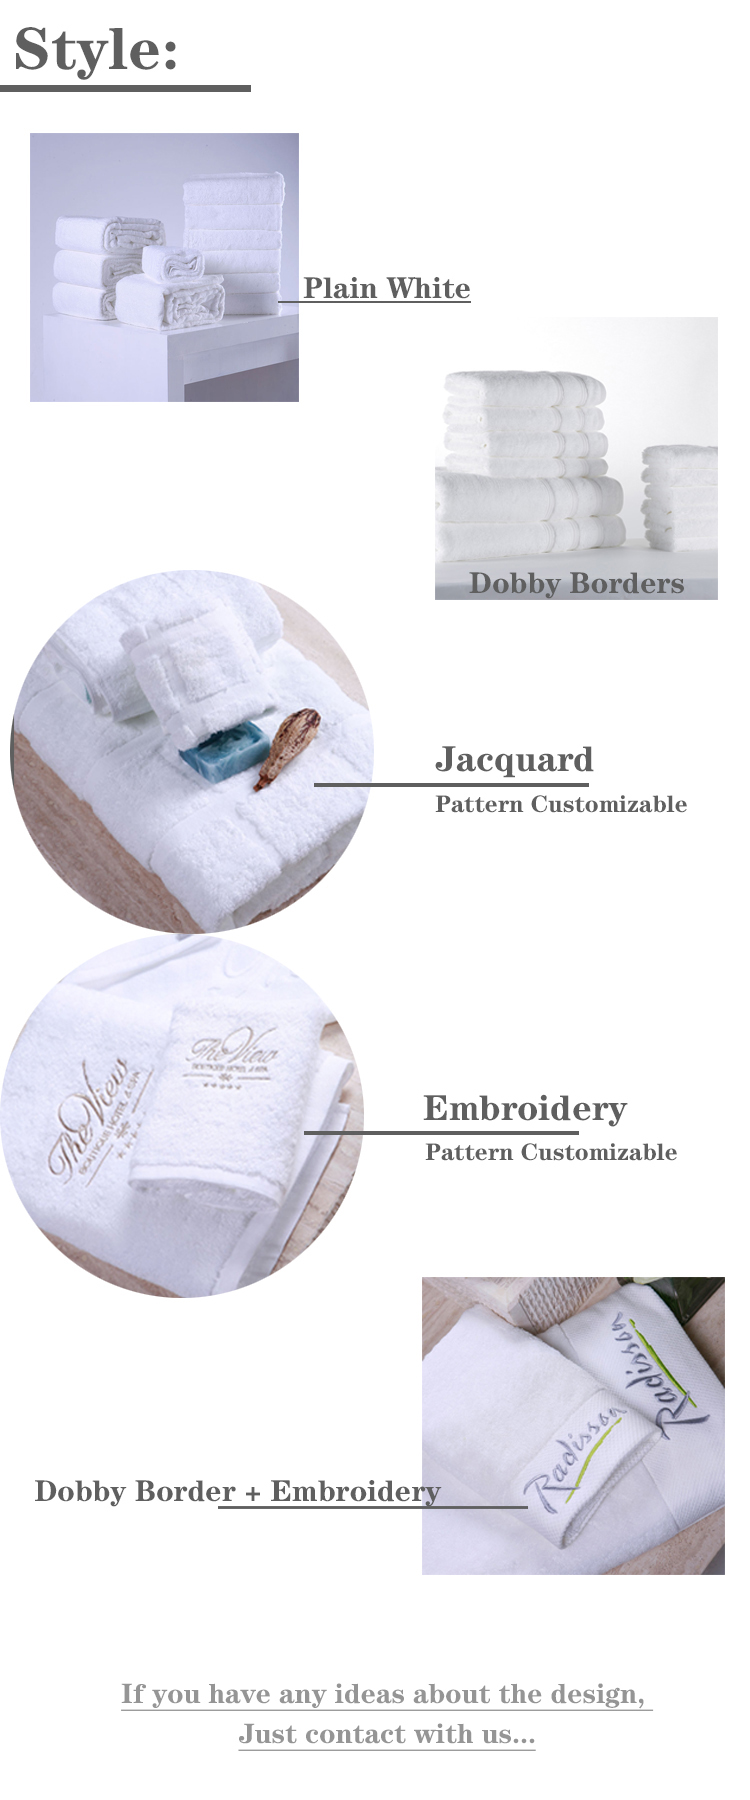 100% Cotton Luxury 5 Star Embroidery Hotel Towel Sets White Bath Towels 20